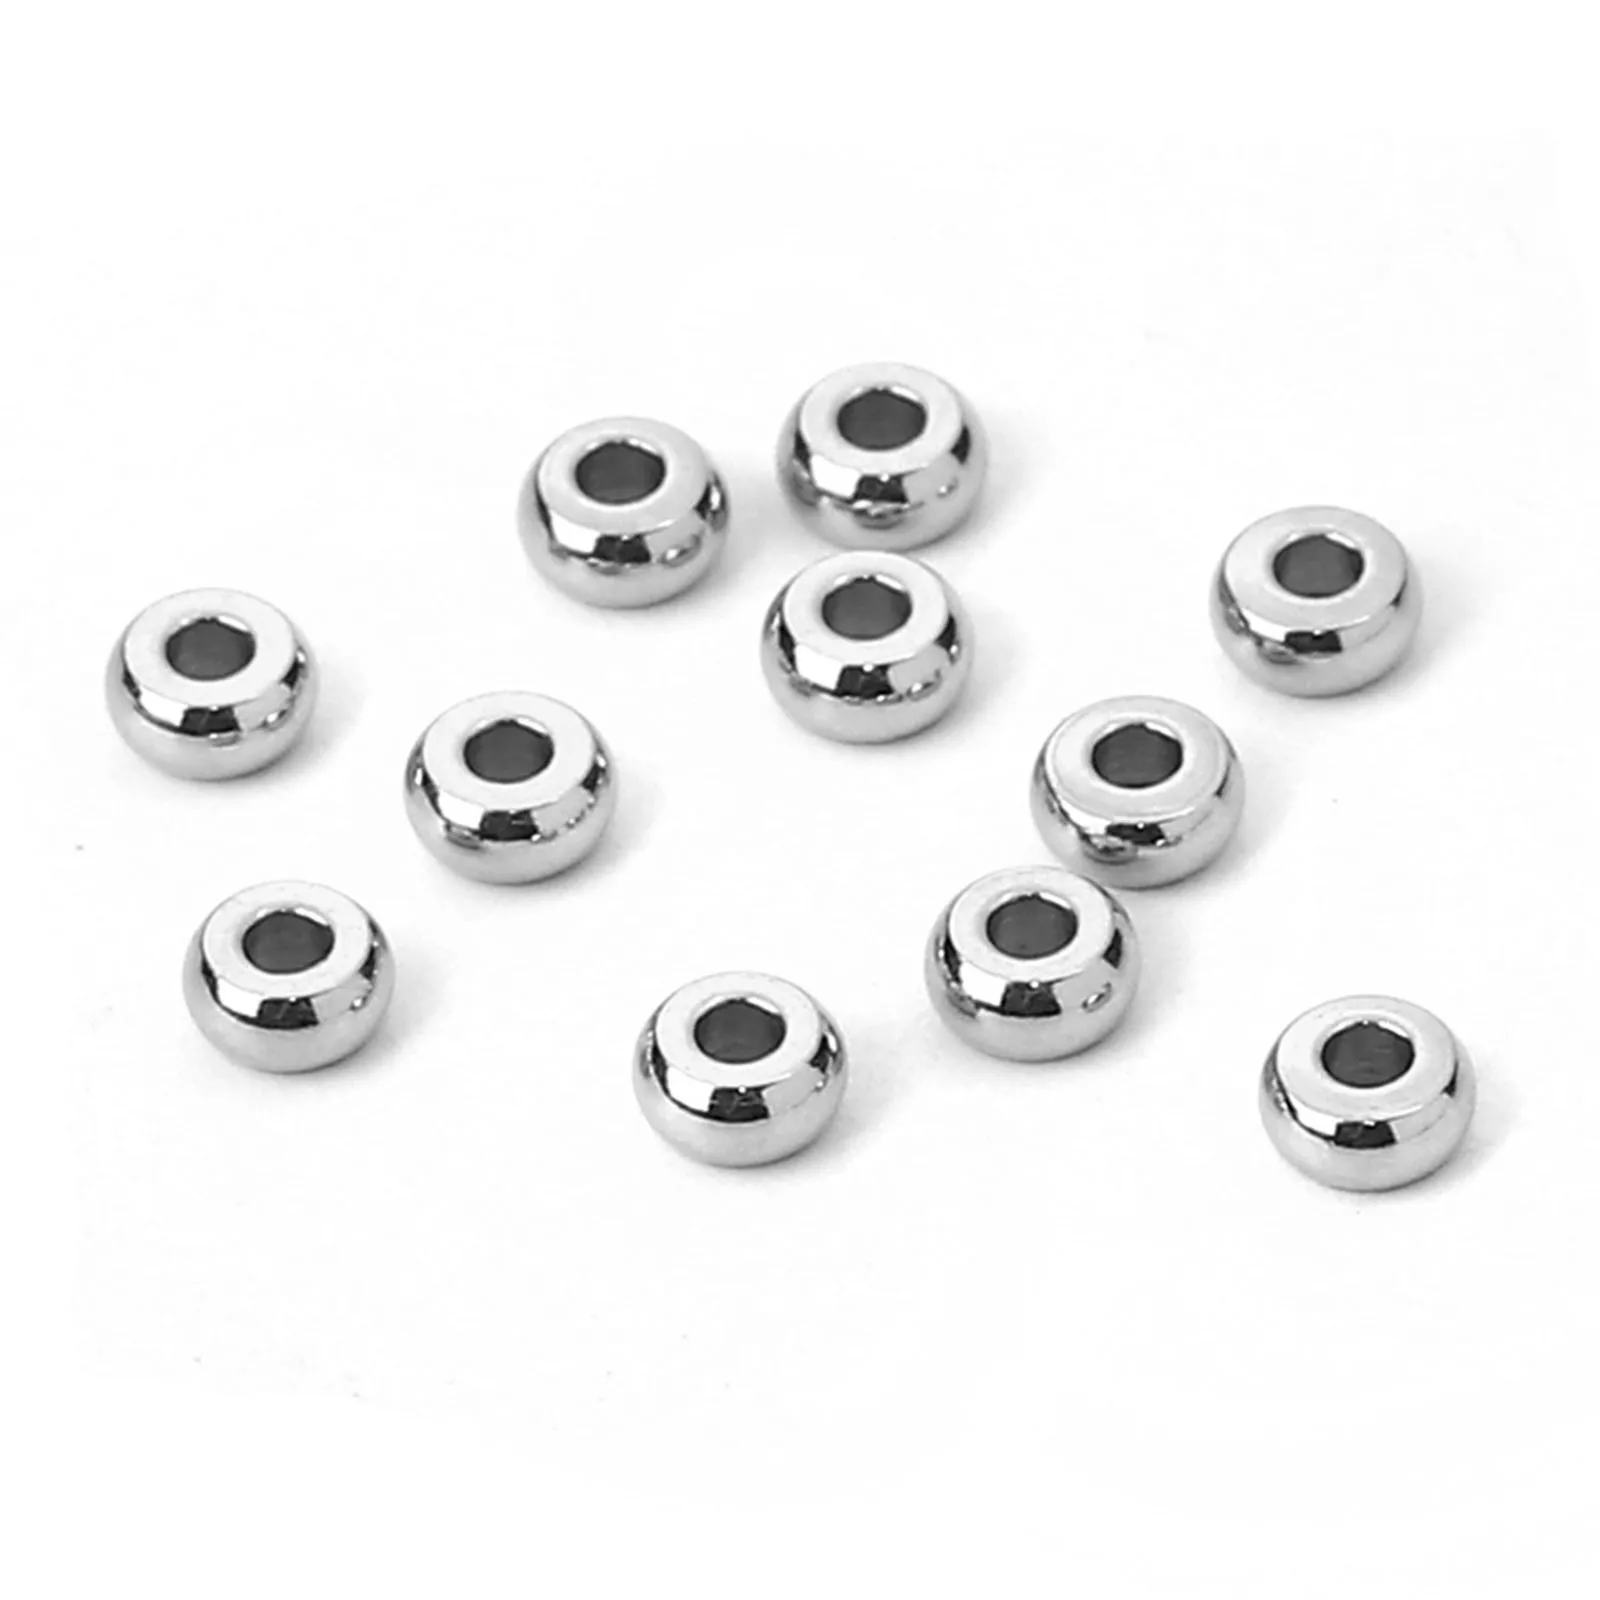 

20/30/50PCs Stainless Steel Spacer Beads Round Silver Color Loose Beads For Jewlery Making Diy Bracelet Accessories 4 5 6 7mm